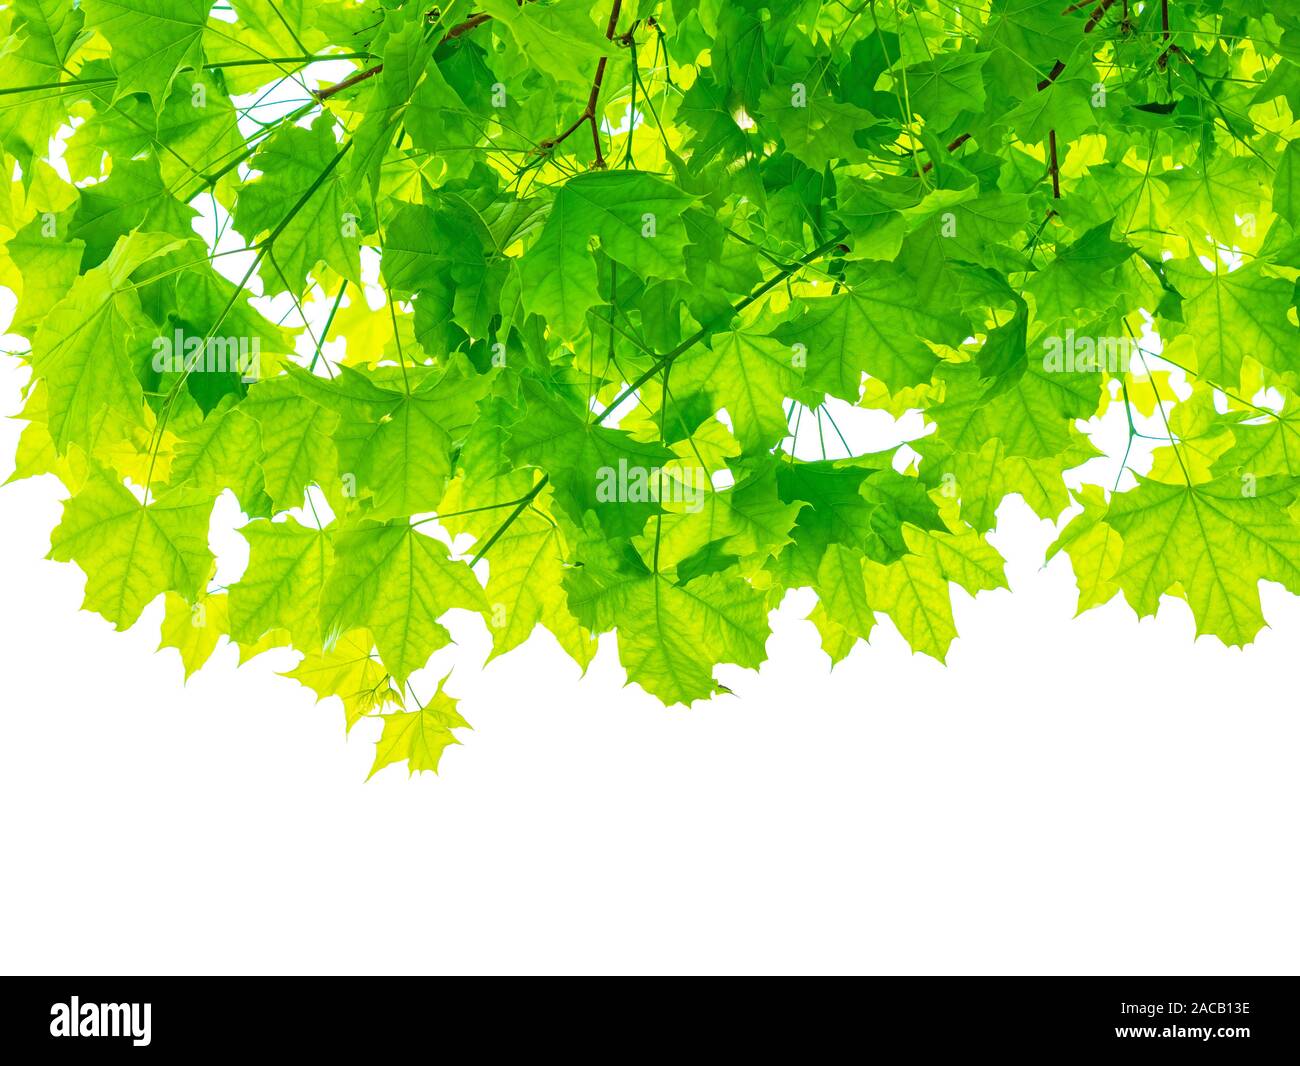 Maple tree branches with green leaves isolated on white background Stock Photo